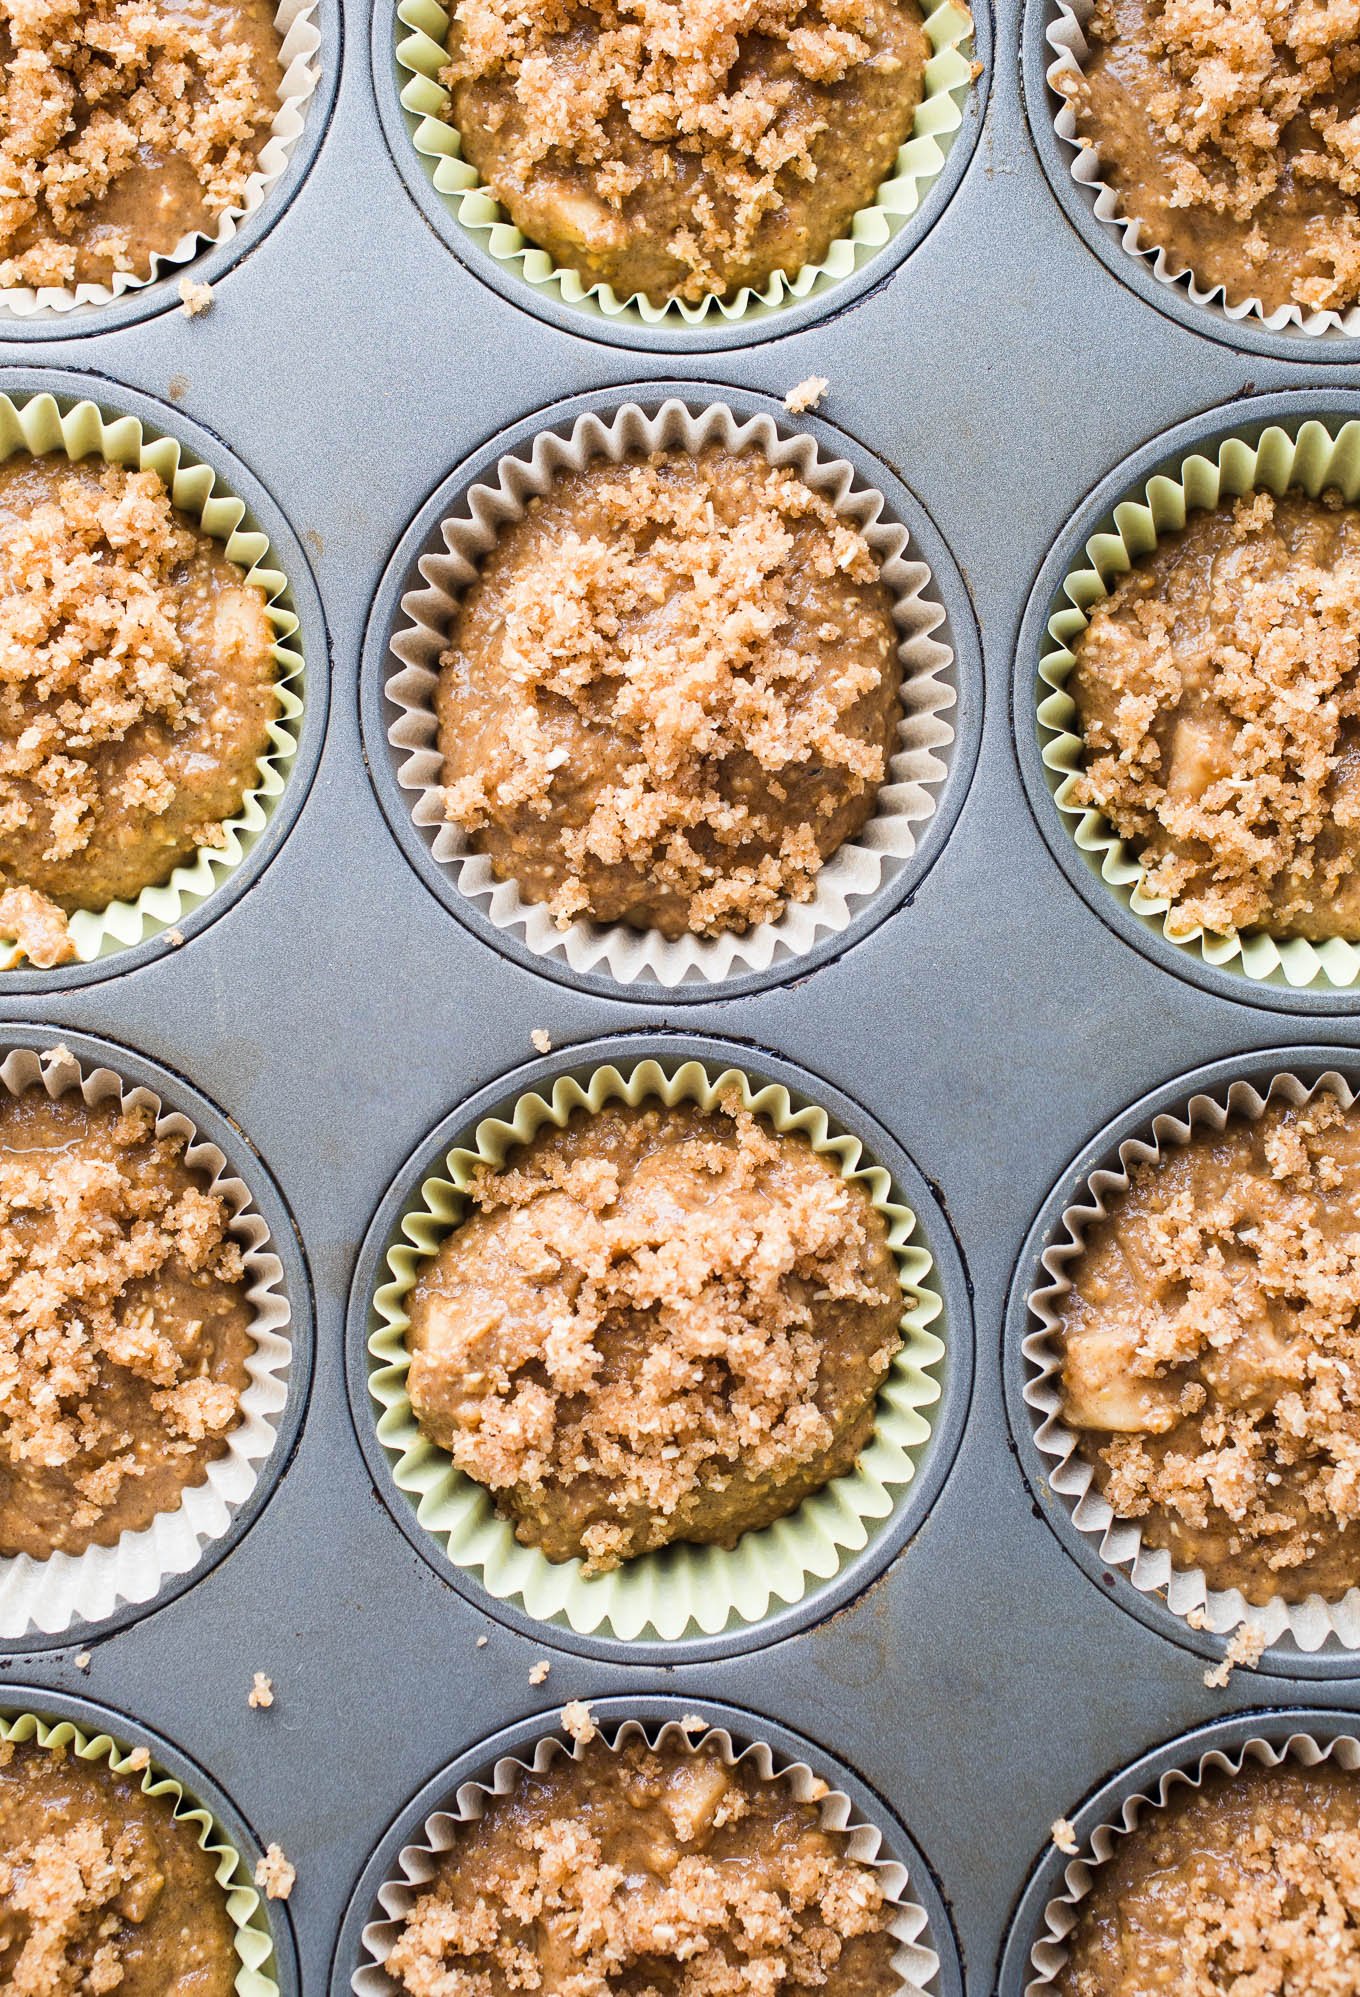 Gluten-Free Apple Crumb Muffins are made with whole grain gluten-free oat flour, almond flour, applesauce, and coconut sugar topped with a cinnamon sugar crumble. Dairy-free, vegan.